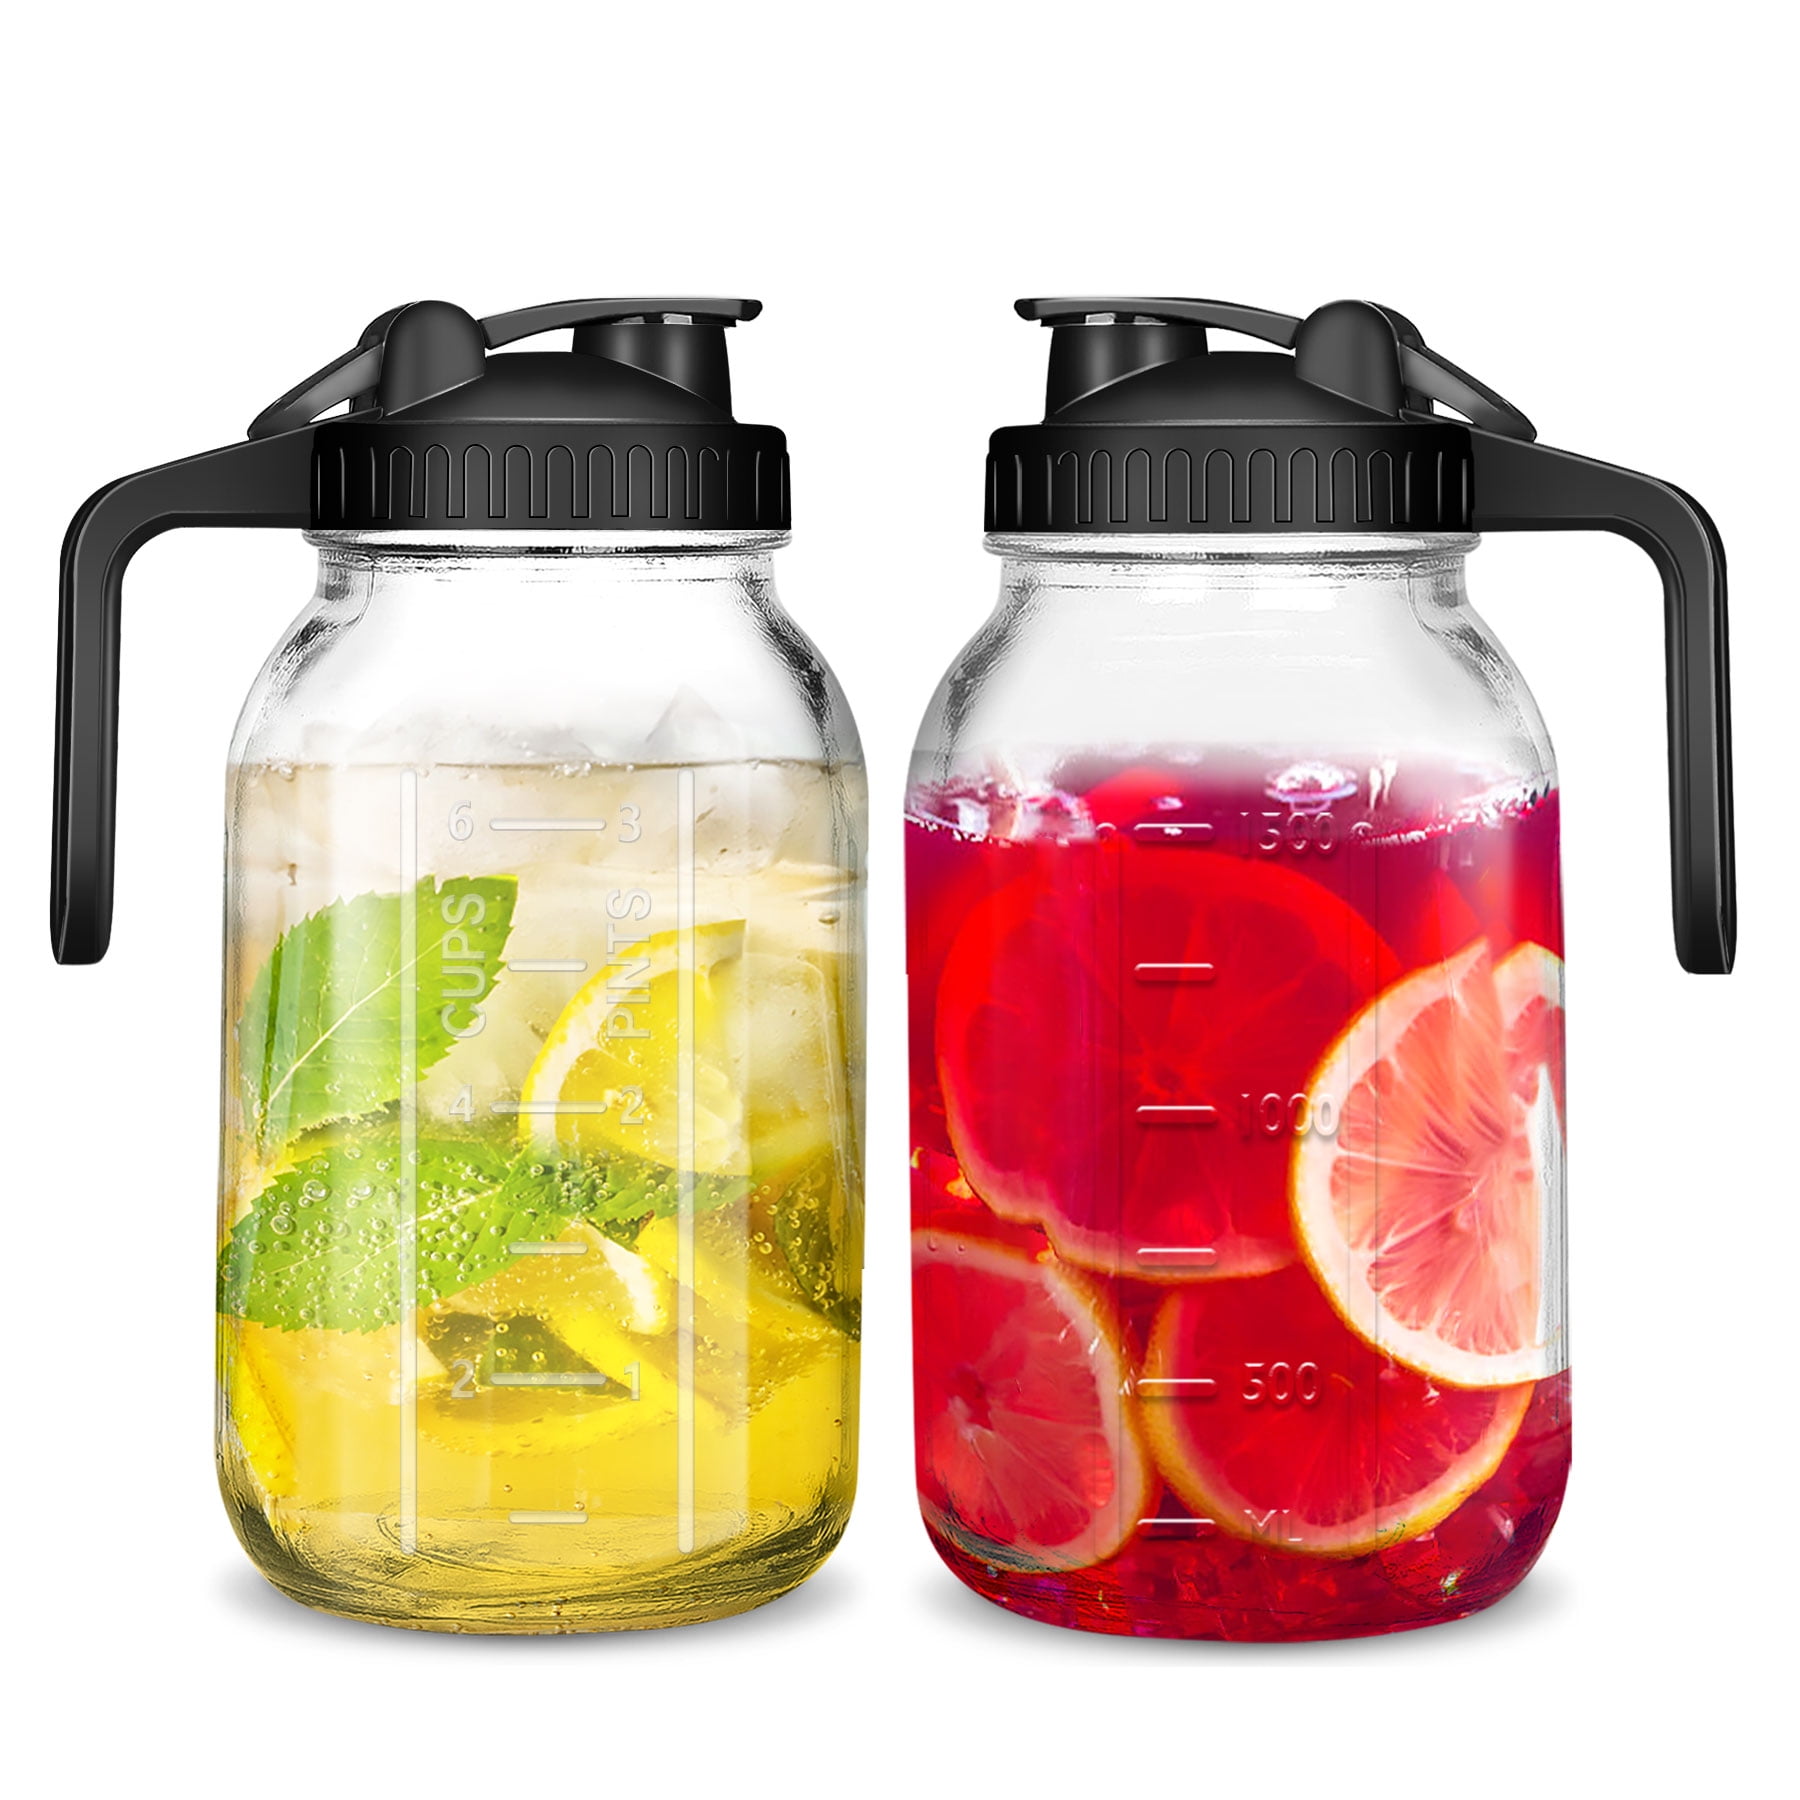 40 Oz Glass Water Pitcher with Lid and Spout for Iced Tea, Coffee, Lemonade